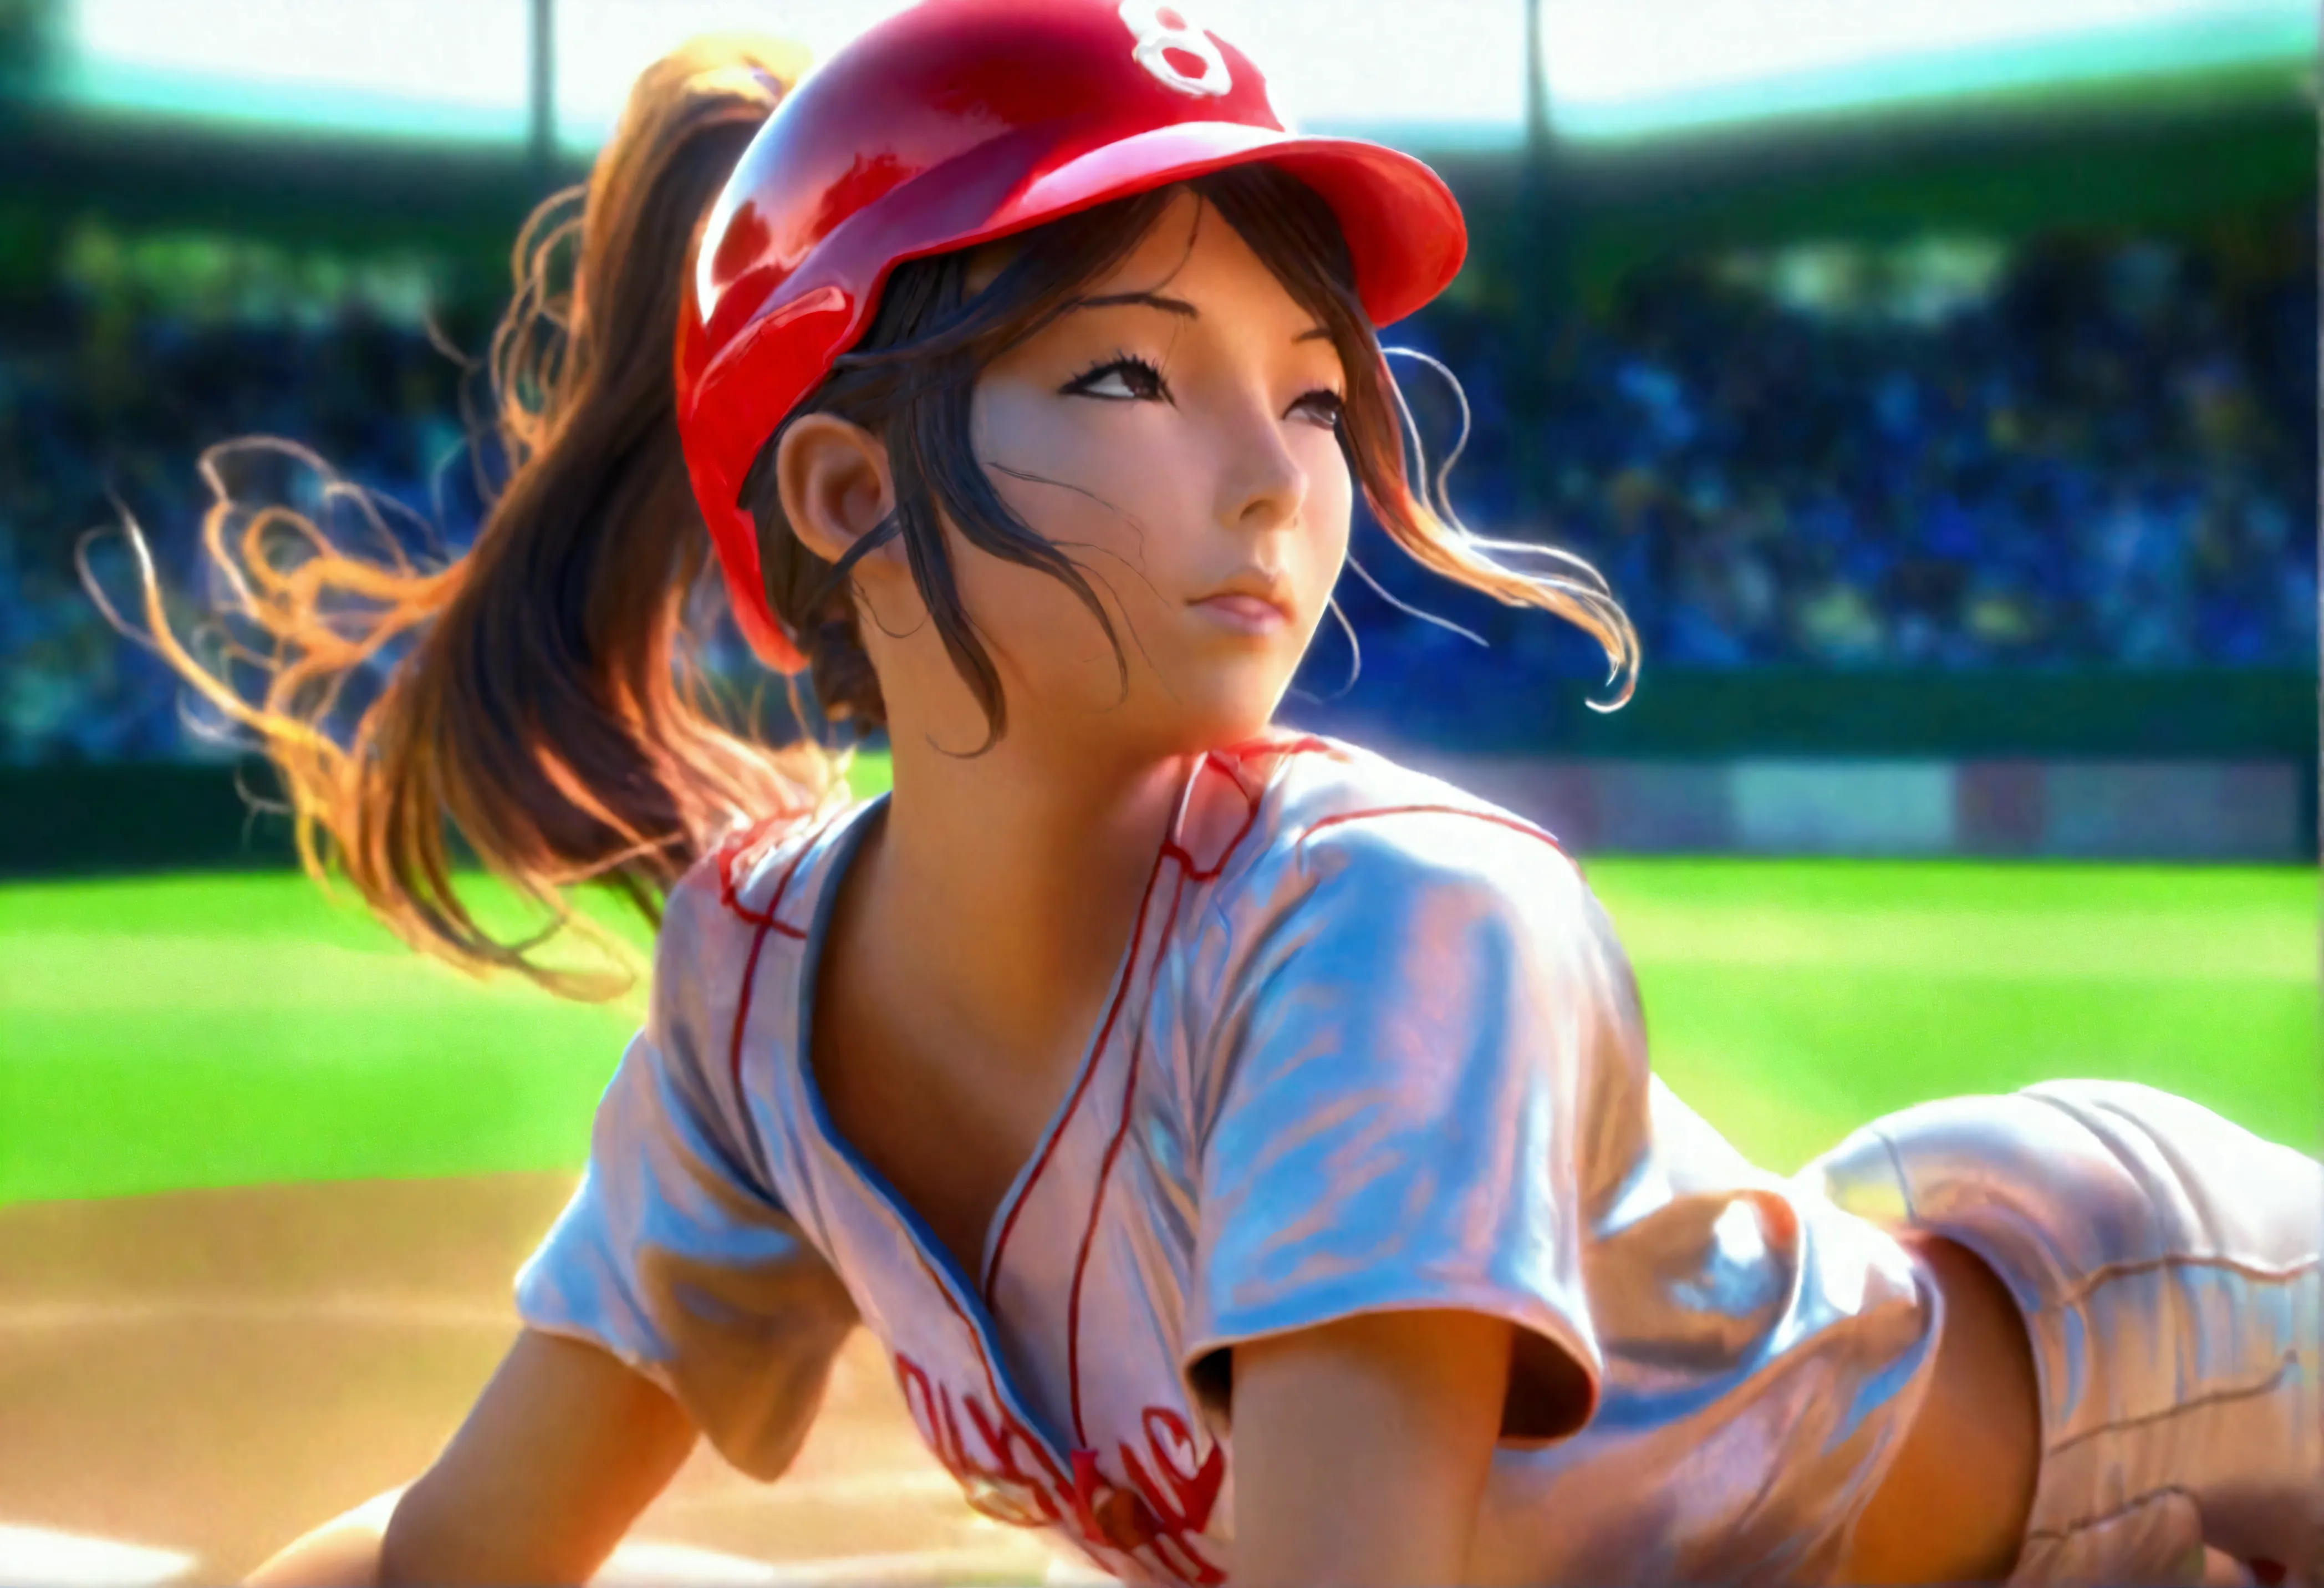 a cute woman in a sexy baseball uniform with her hair in a ponytail, sliding into 3rd base, entire body visible, camera angle lo...